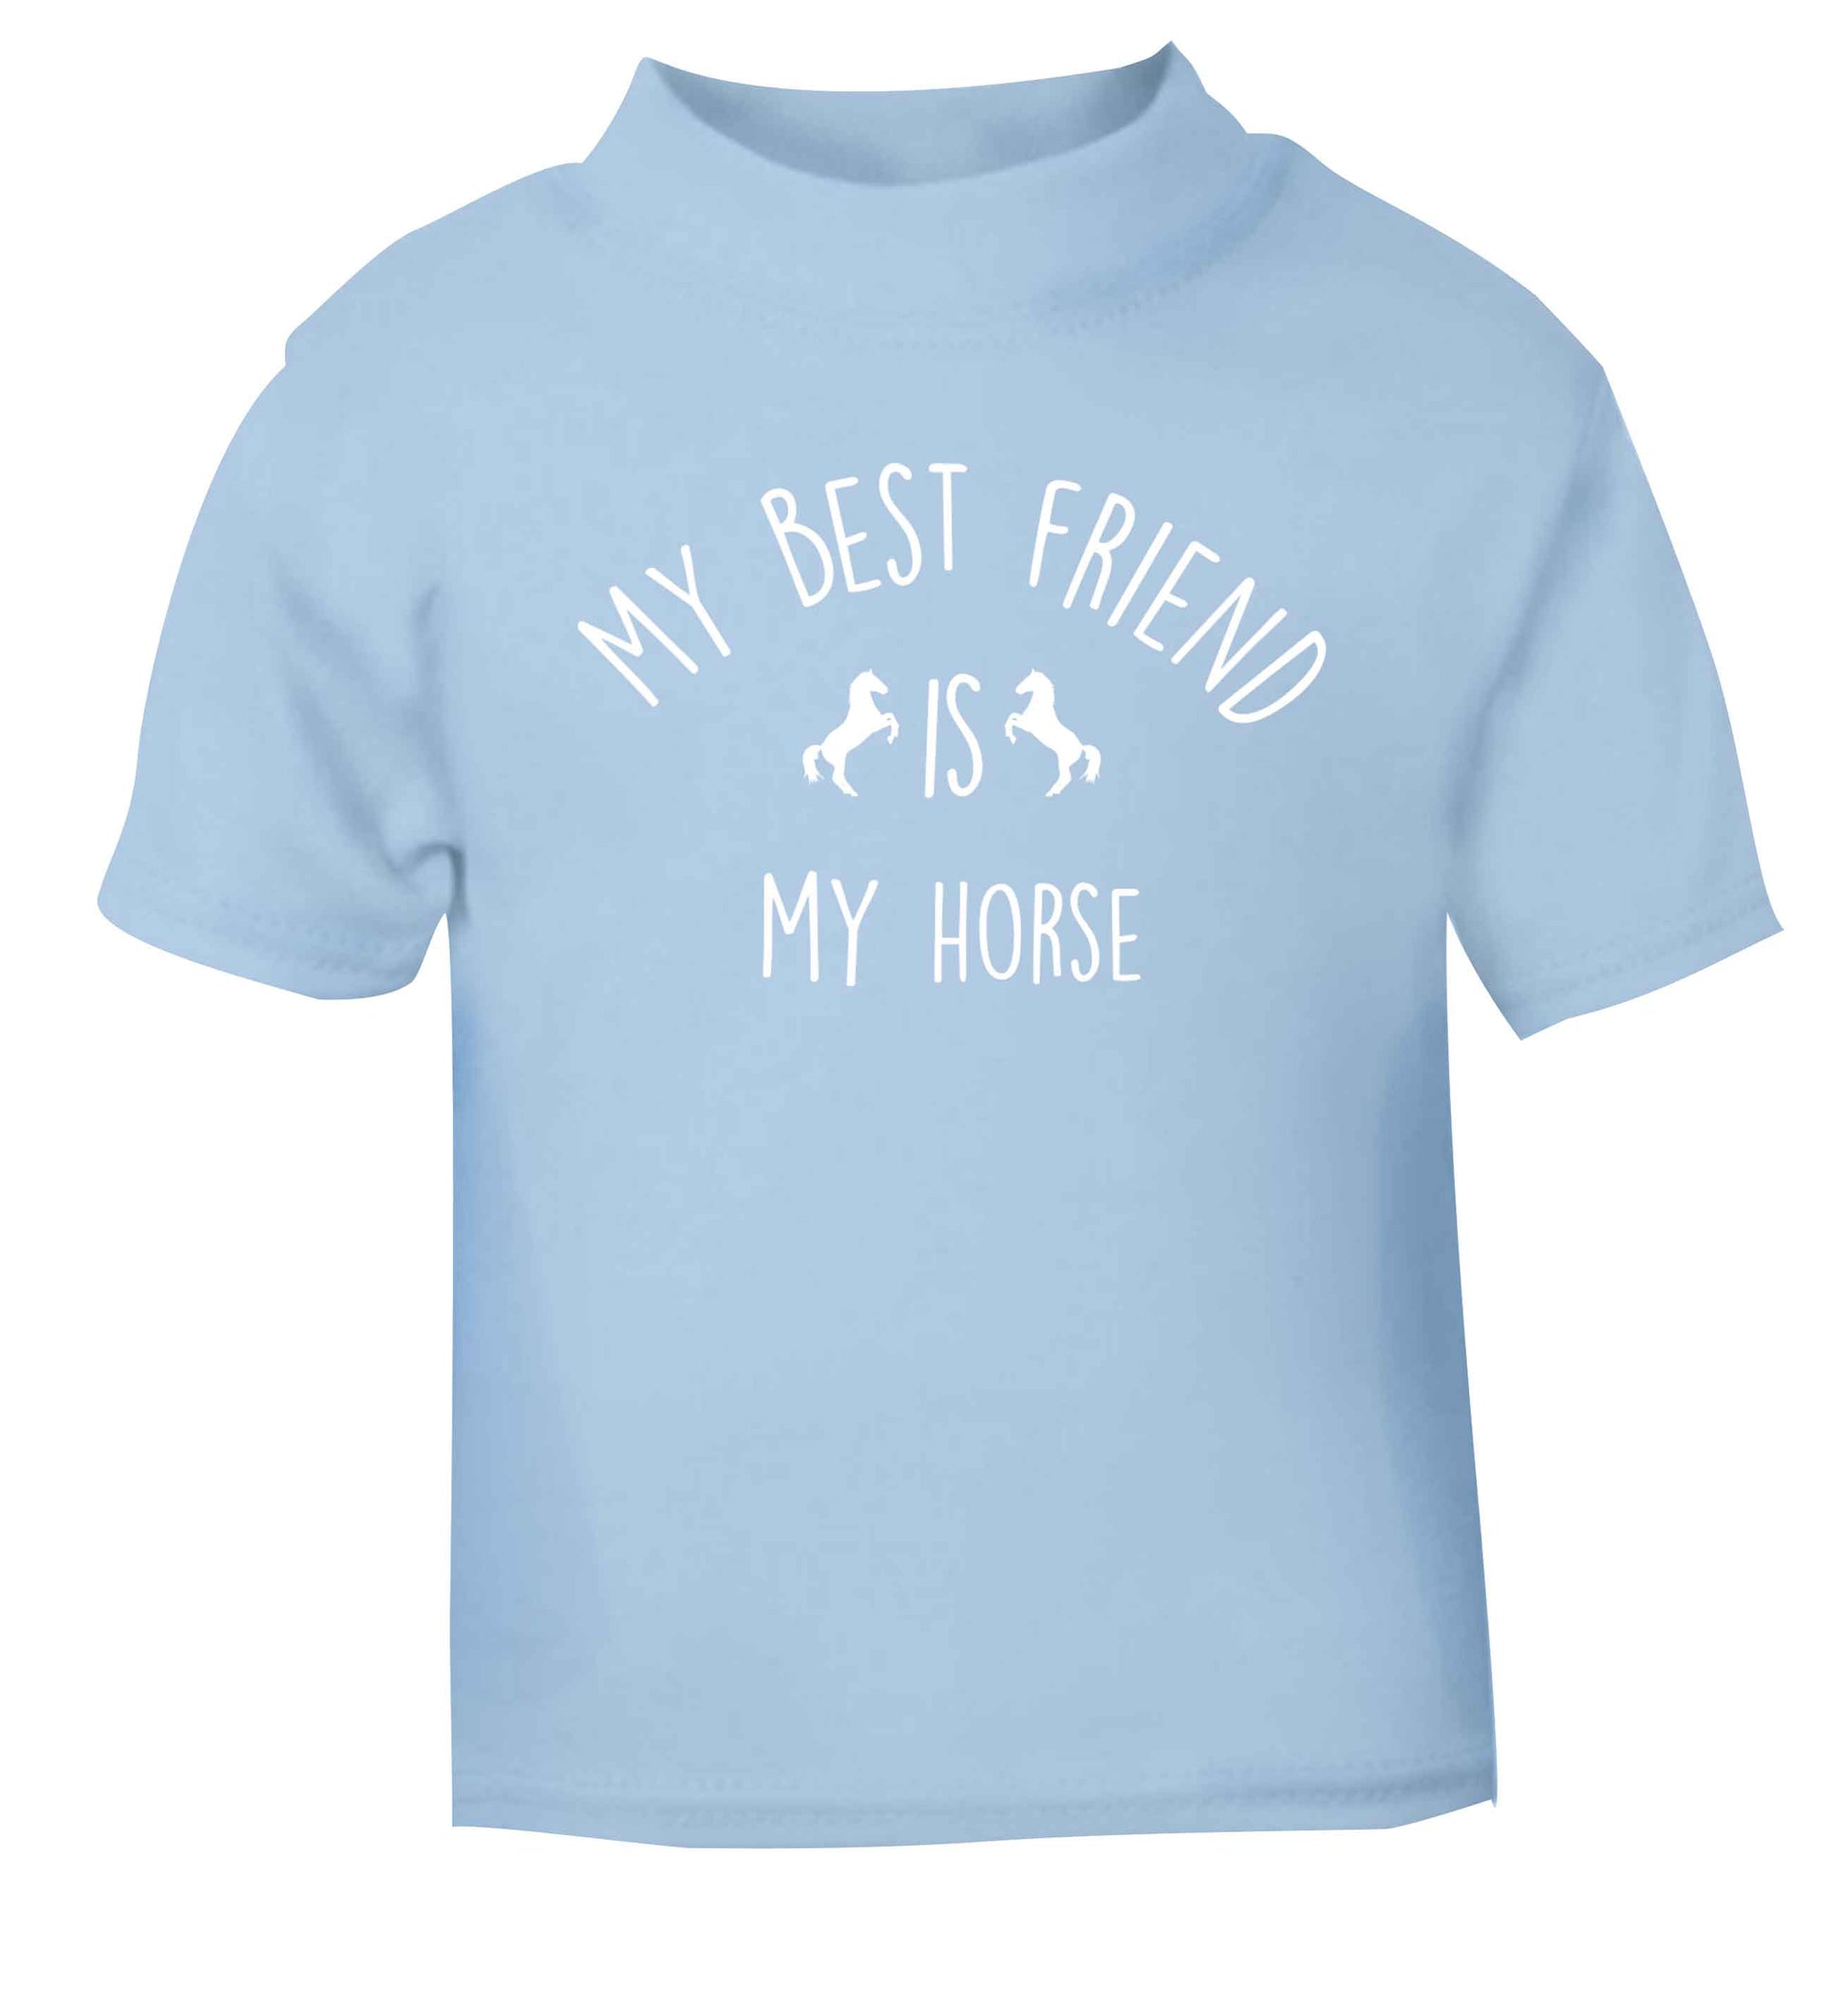 My best friend is my horse light blue baby toddler Tshirt 2 Years